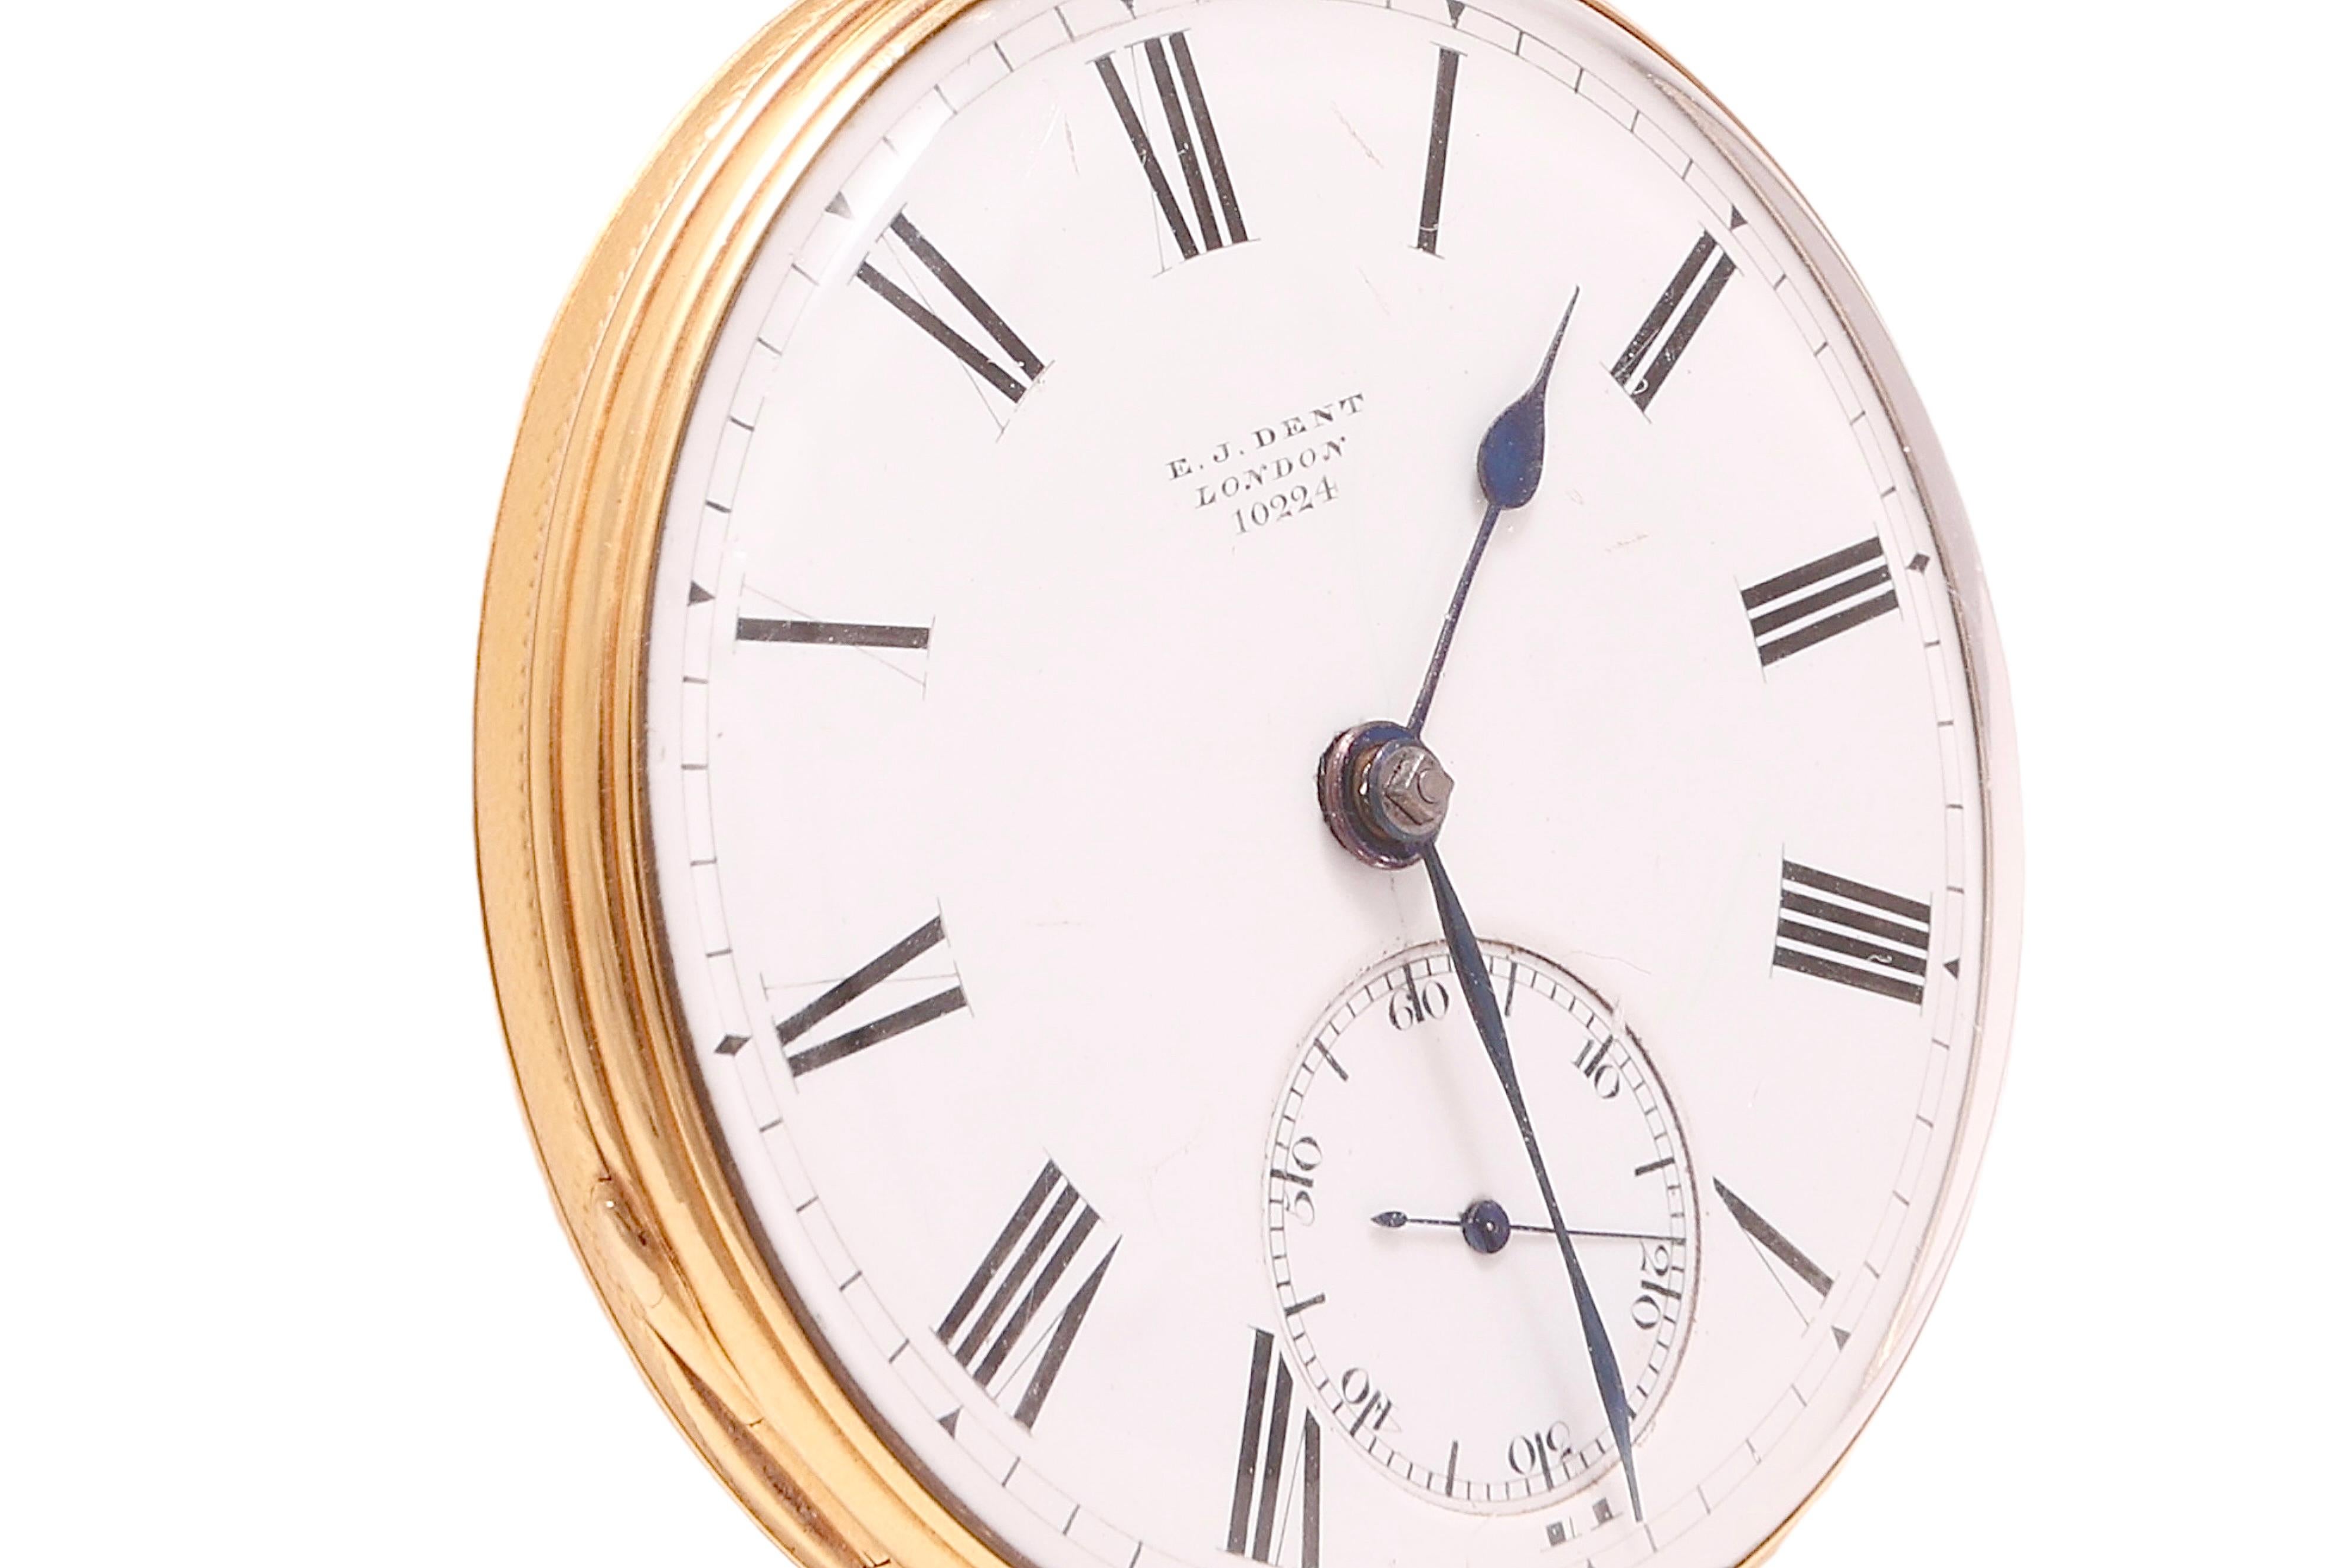 E.J Dent London, Yellow Gold Open Face Verge Pocket watch  

Case: 18 Kt Solid Yellow Gold Diameter 45.5 mm, thickness 12.2 mm

Total weight: 68.9 gram / 2.430 oz / 44.3 dwt